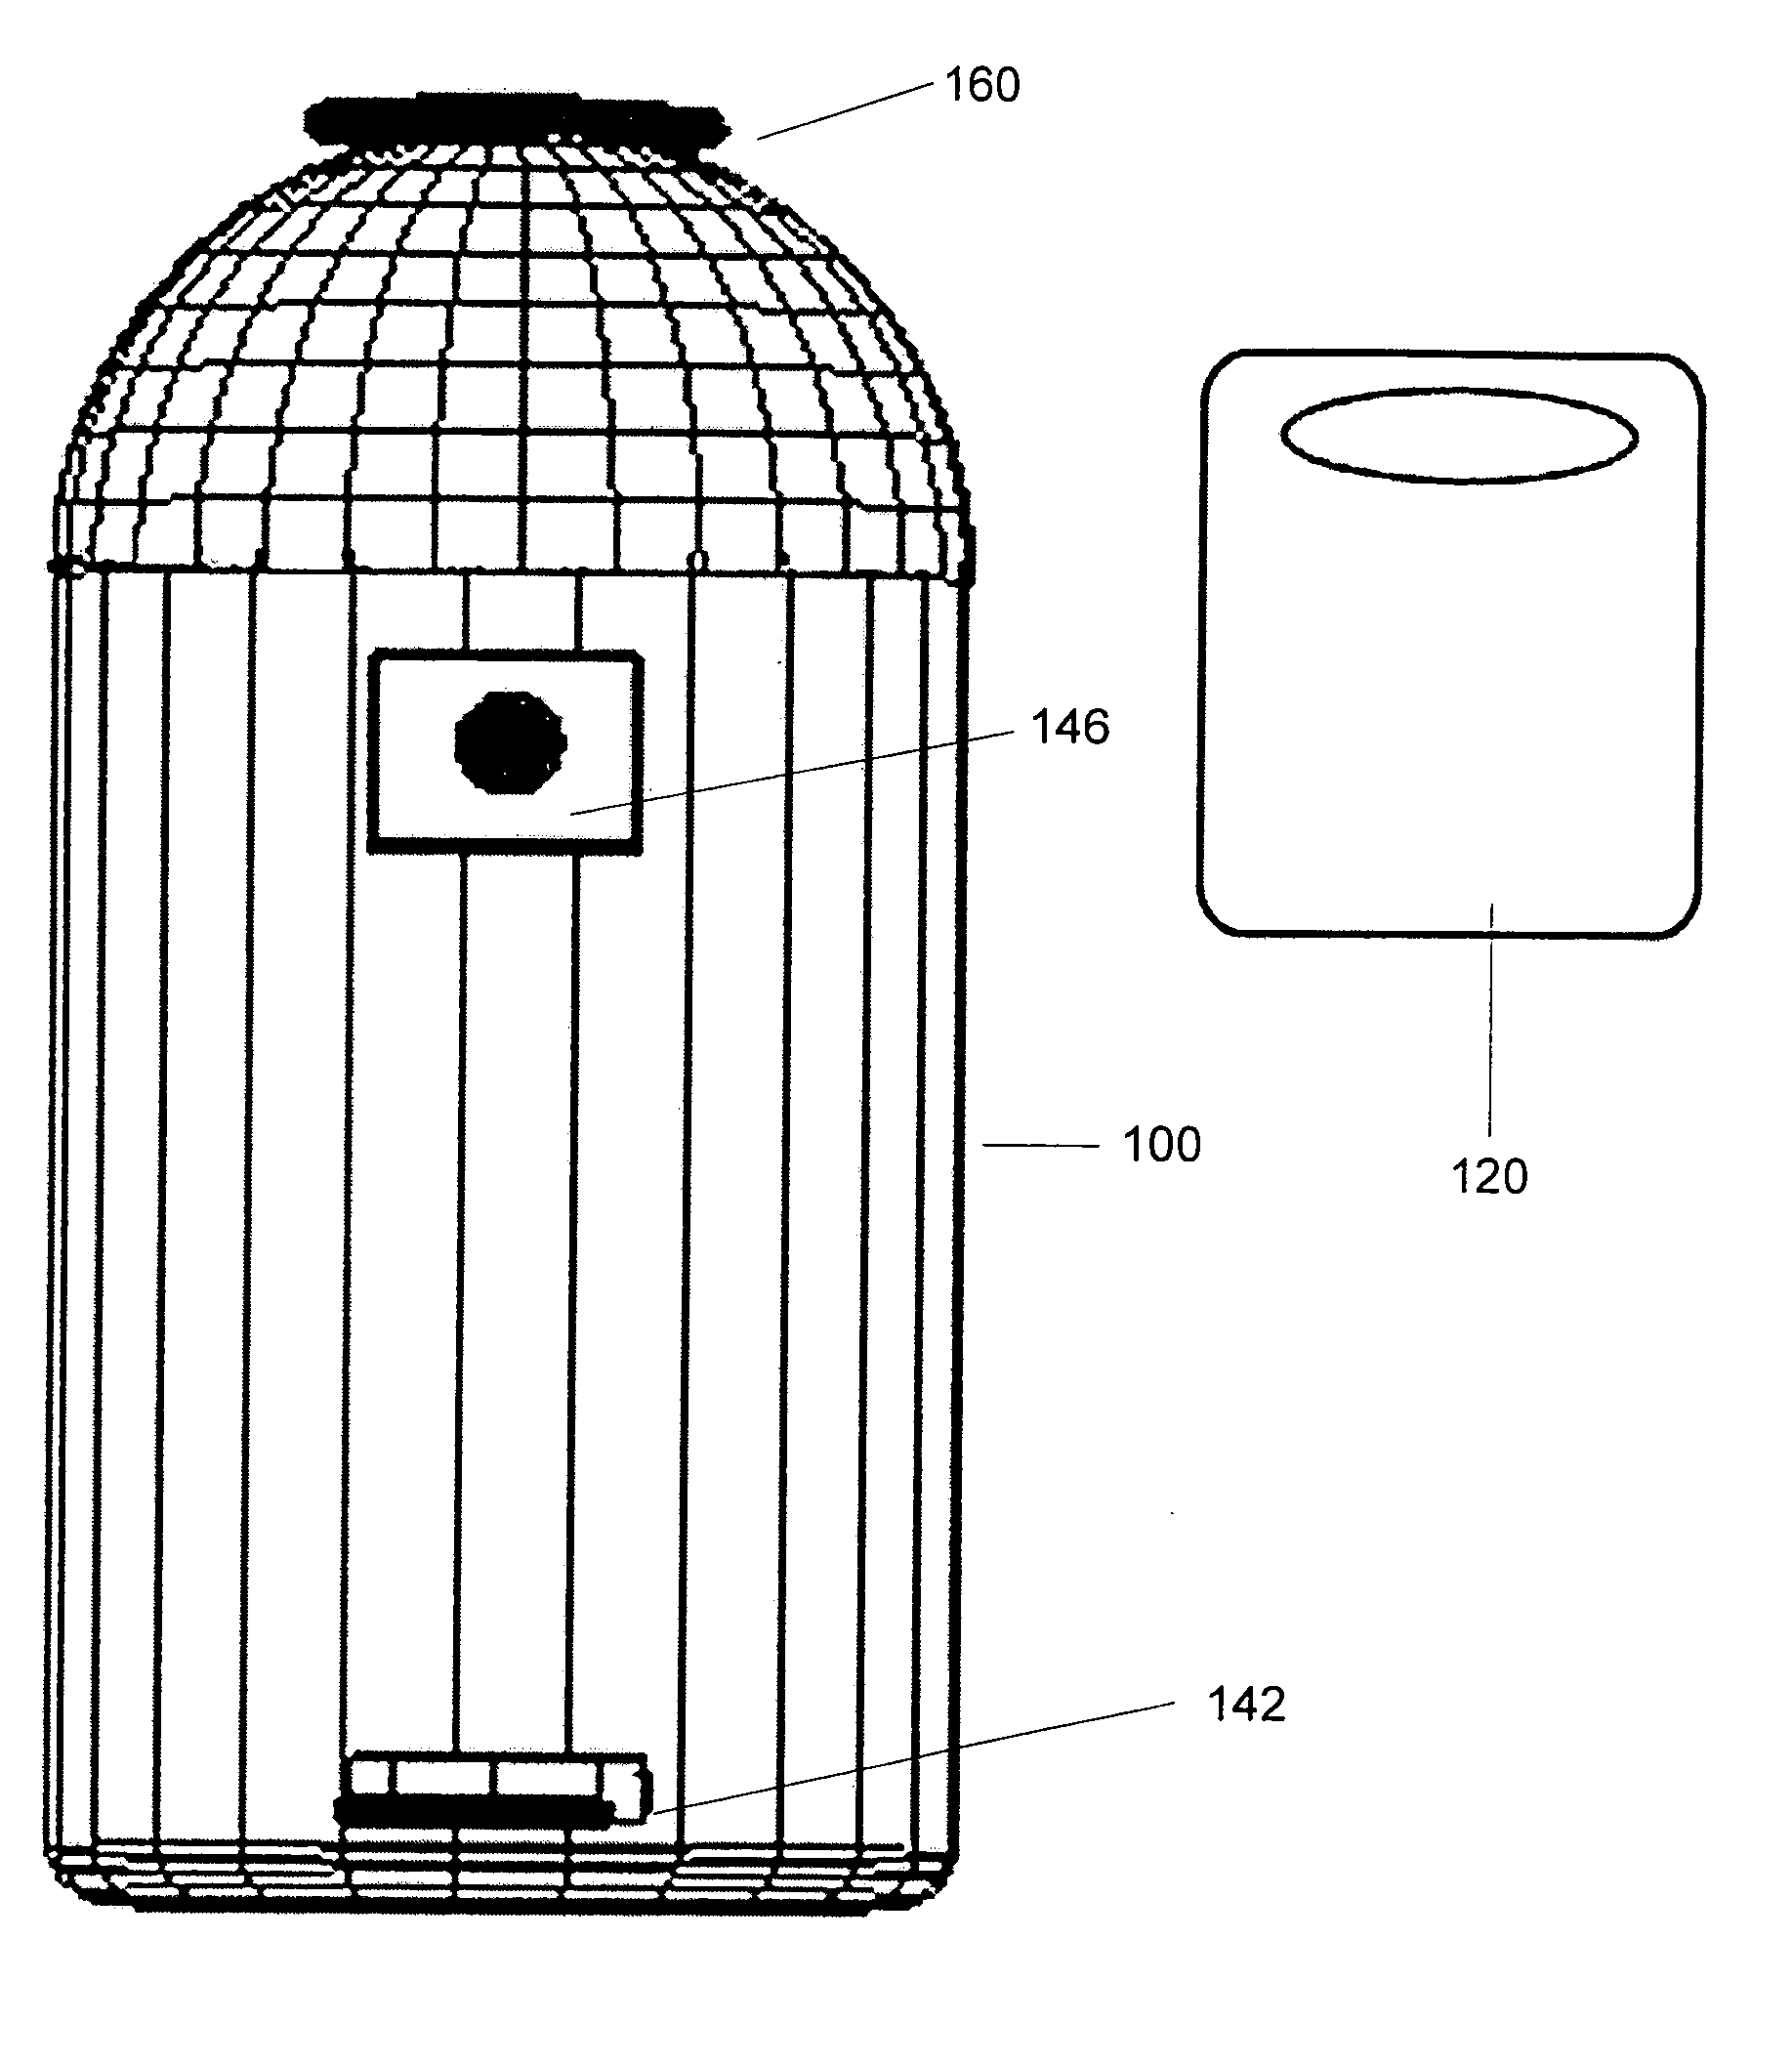 Apparatus and method for temporary storage of animal waste